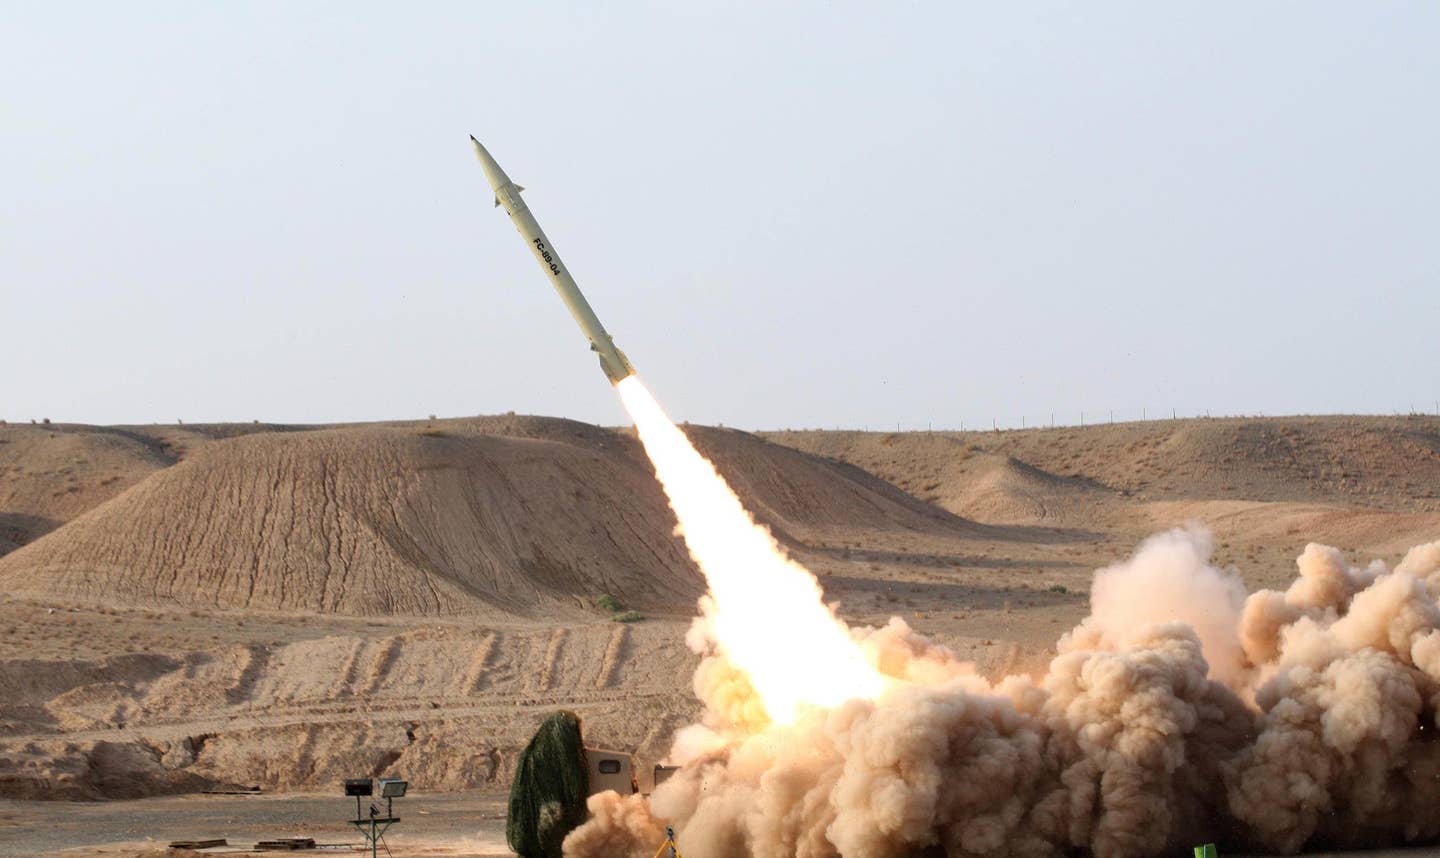 Ukrainian officials say Iran will soon provide Russia with short range ballistic missiles like the Fateh-110. (Photo by Mohsen Shandiz/Corbis via Getty Images)